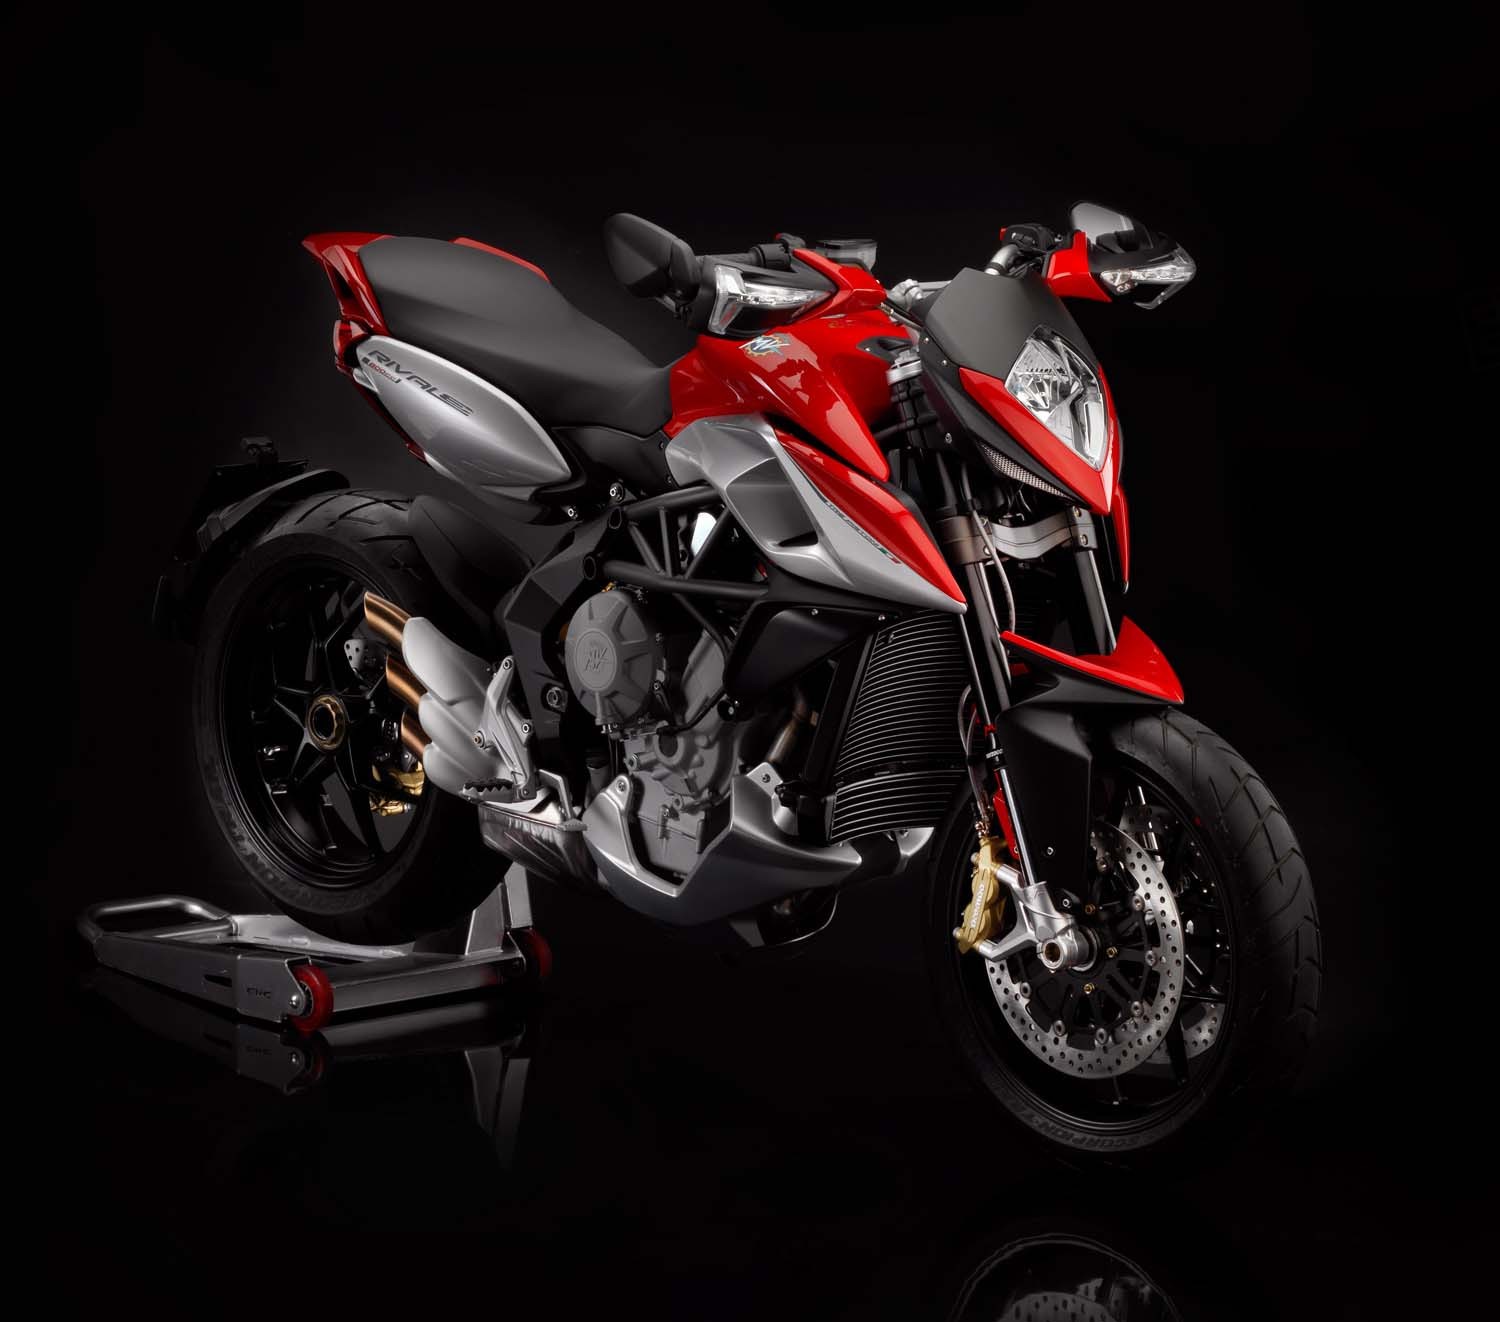 General 1500x1322 motorcycle MV agusta vehicle black background simple background Red Motorcycles Italian motorcycles